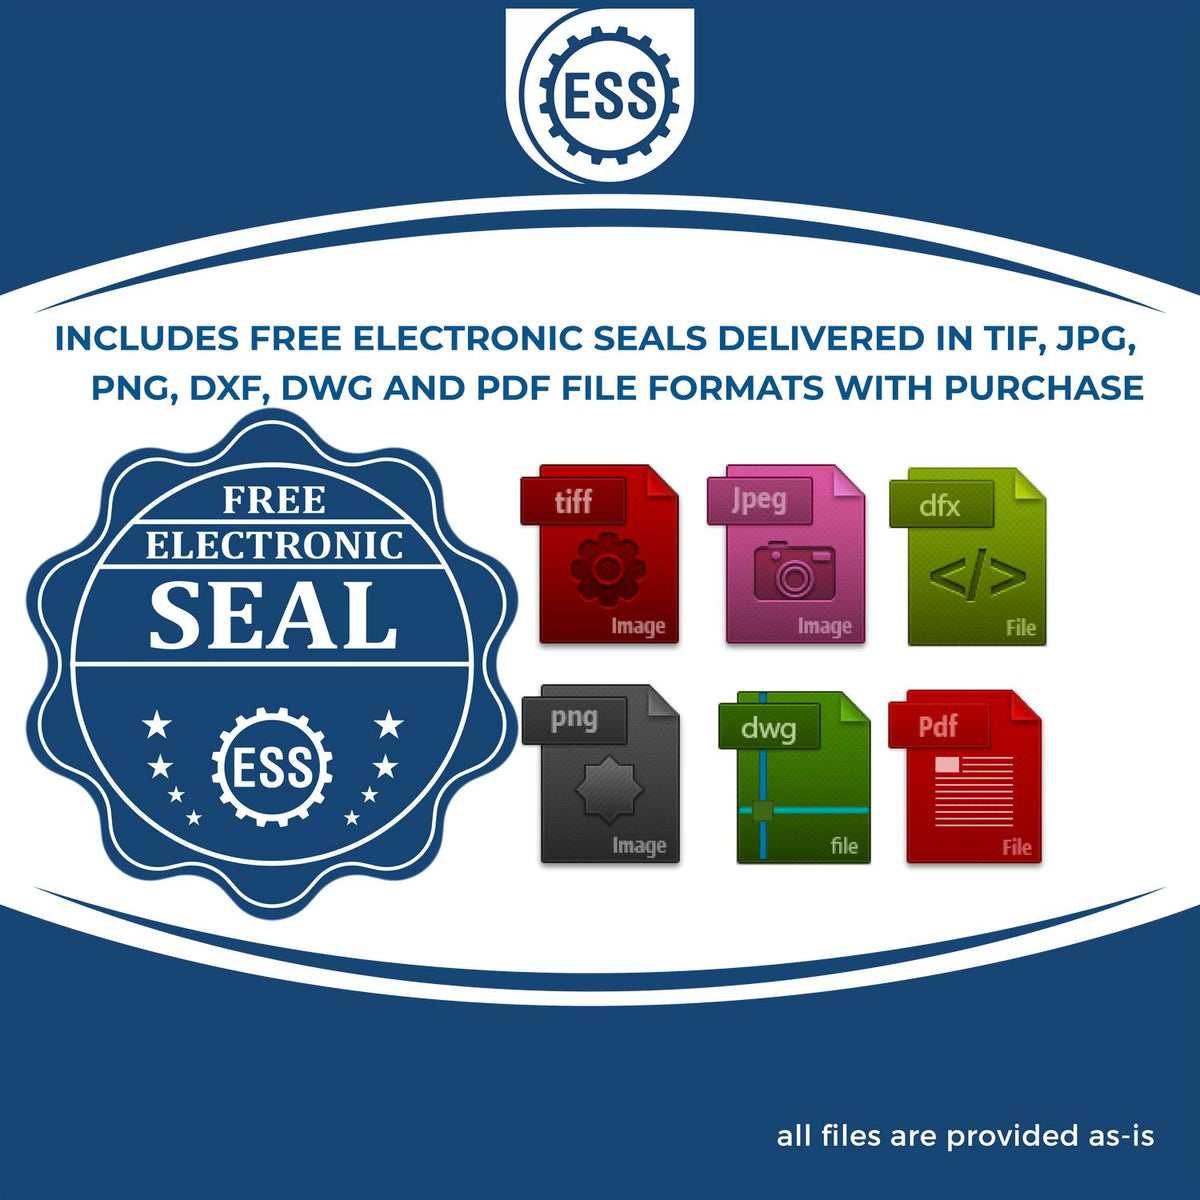 An infographic for the free electronic seal for the Heavy Duty Cast Iron Oklahoma Geologist Seal Embosser illustrating the different file type icons such as DXF, DWG, TIF, JPG and PNG.